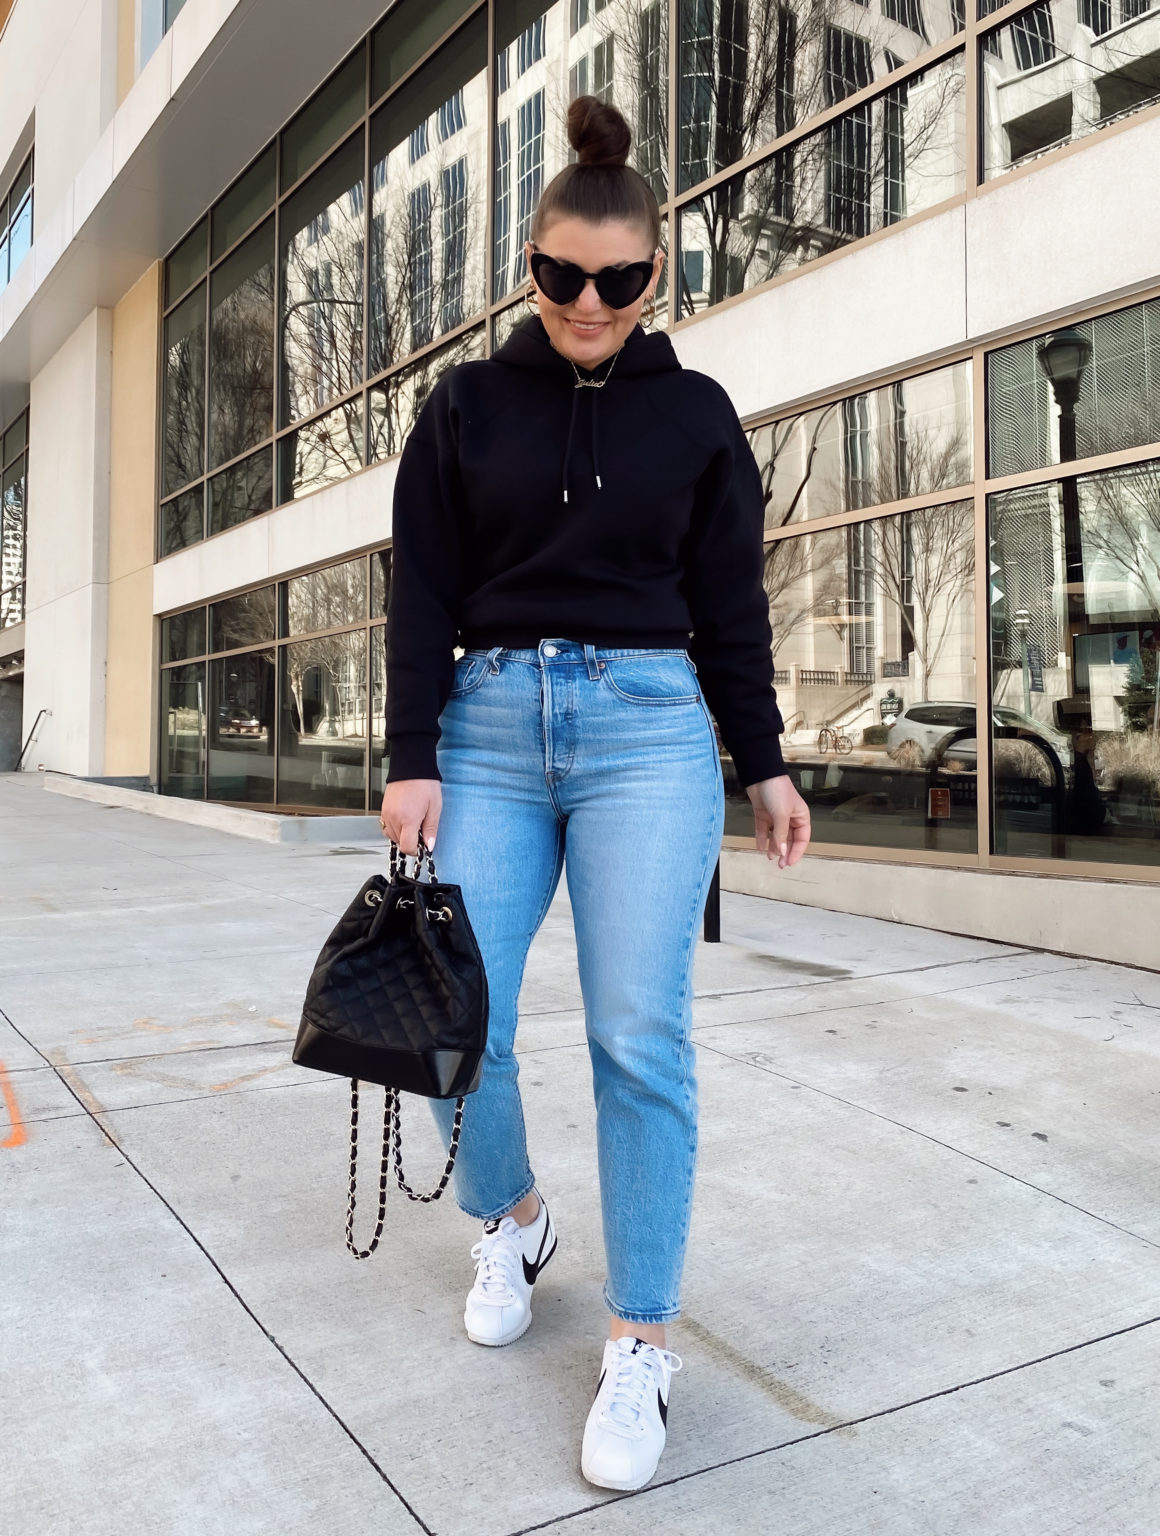 EVERLANE REVIEW: RENEW HOODIE + LEVI’S WEDGIE JEANS